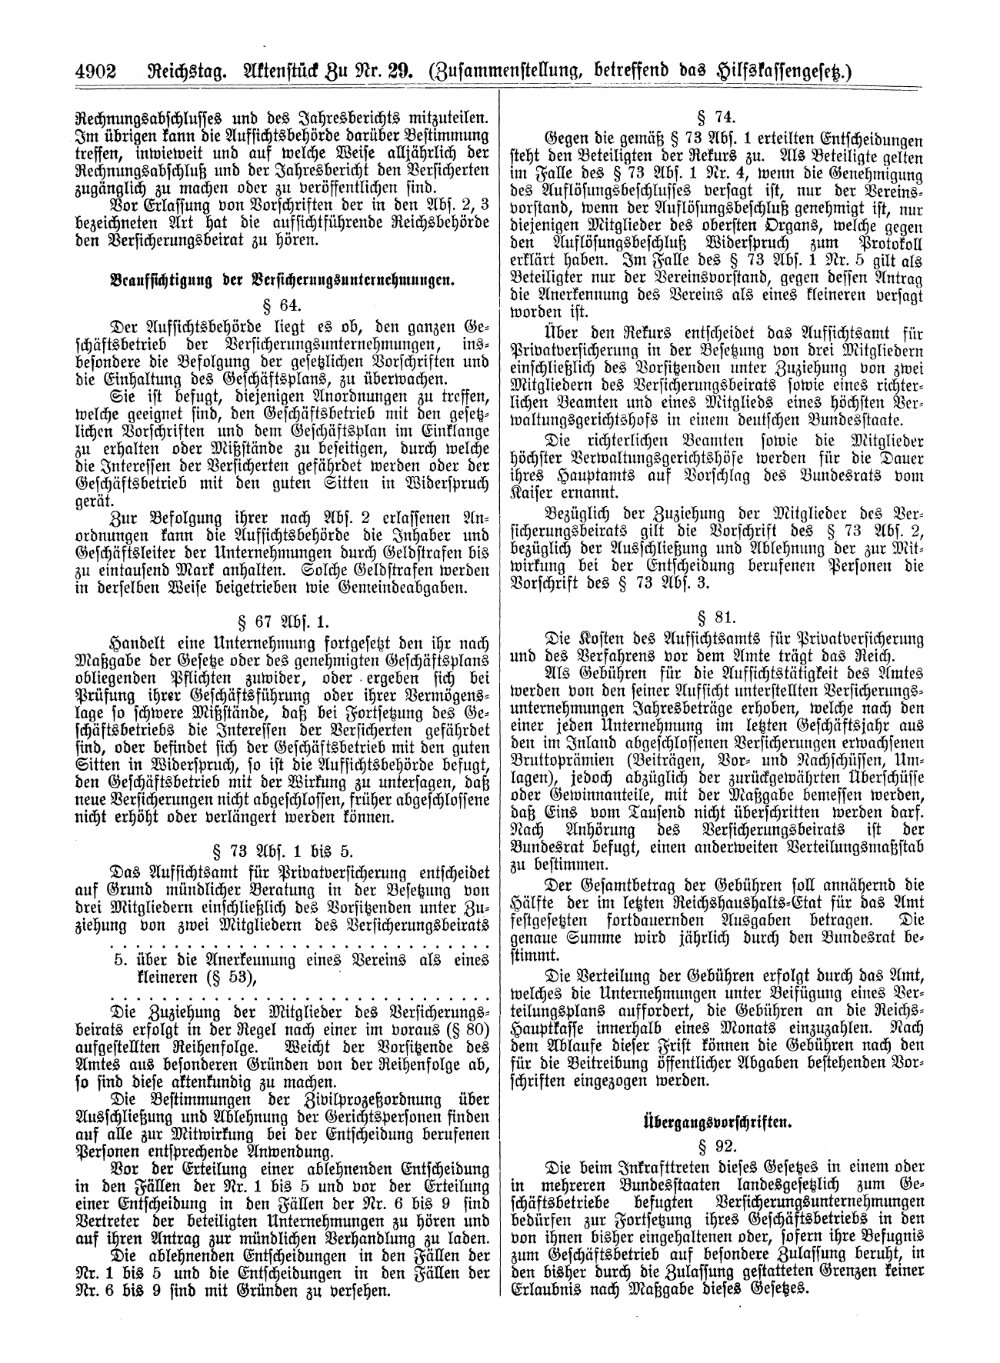 Scan of page 4902